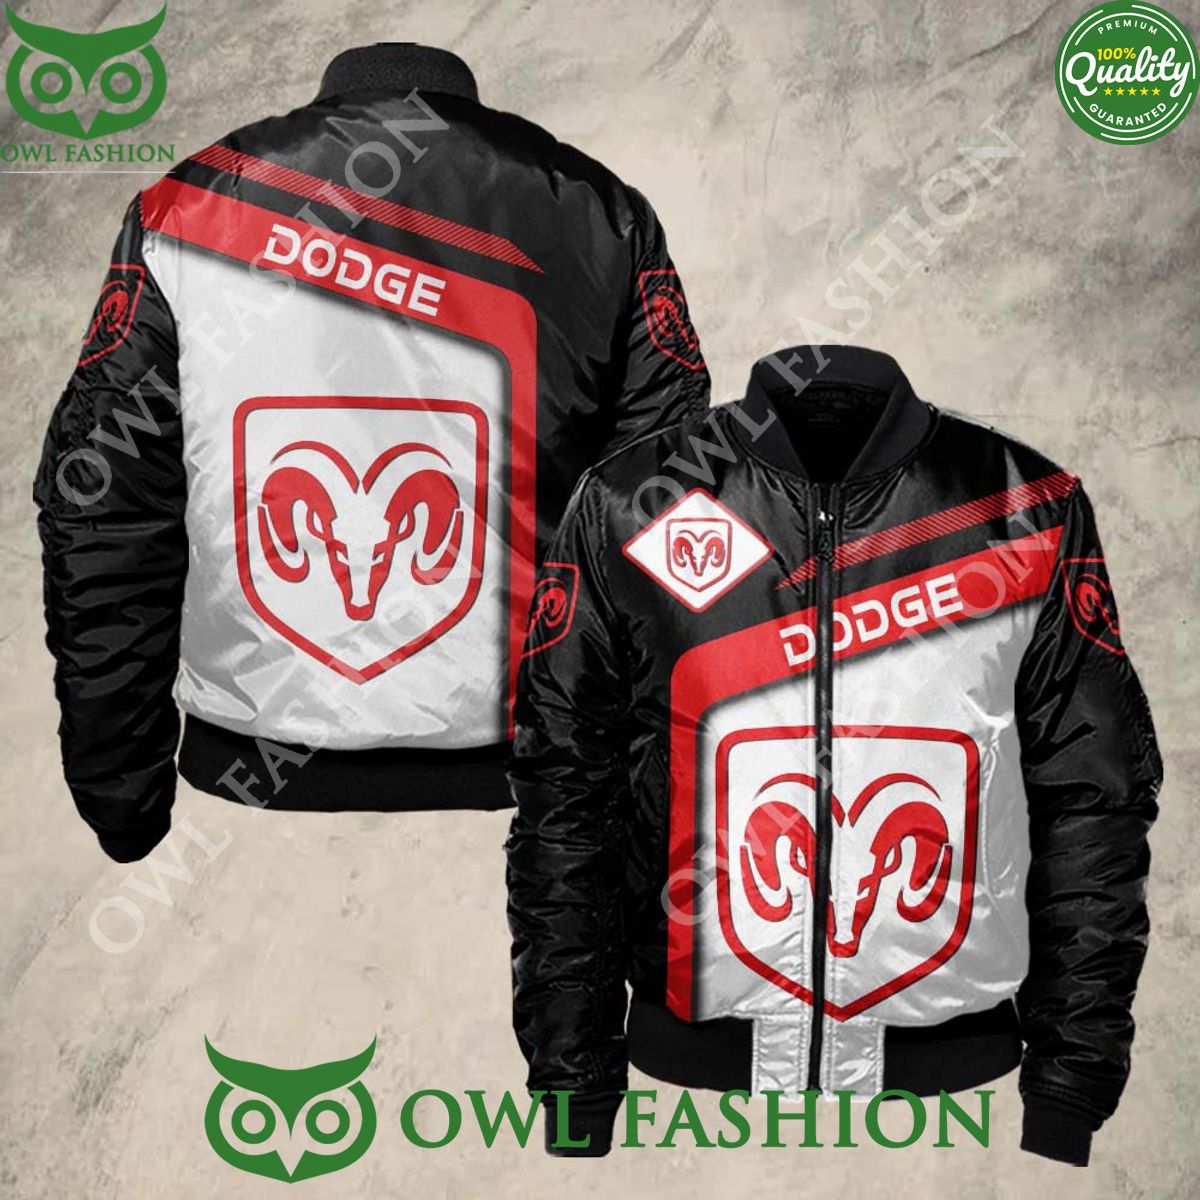 Dodge Sport 3D Bomber Jacket The design has a fresh and contemporary feel.